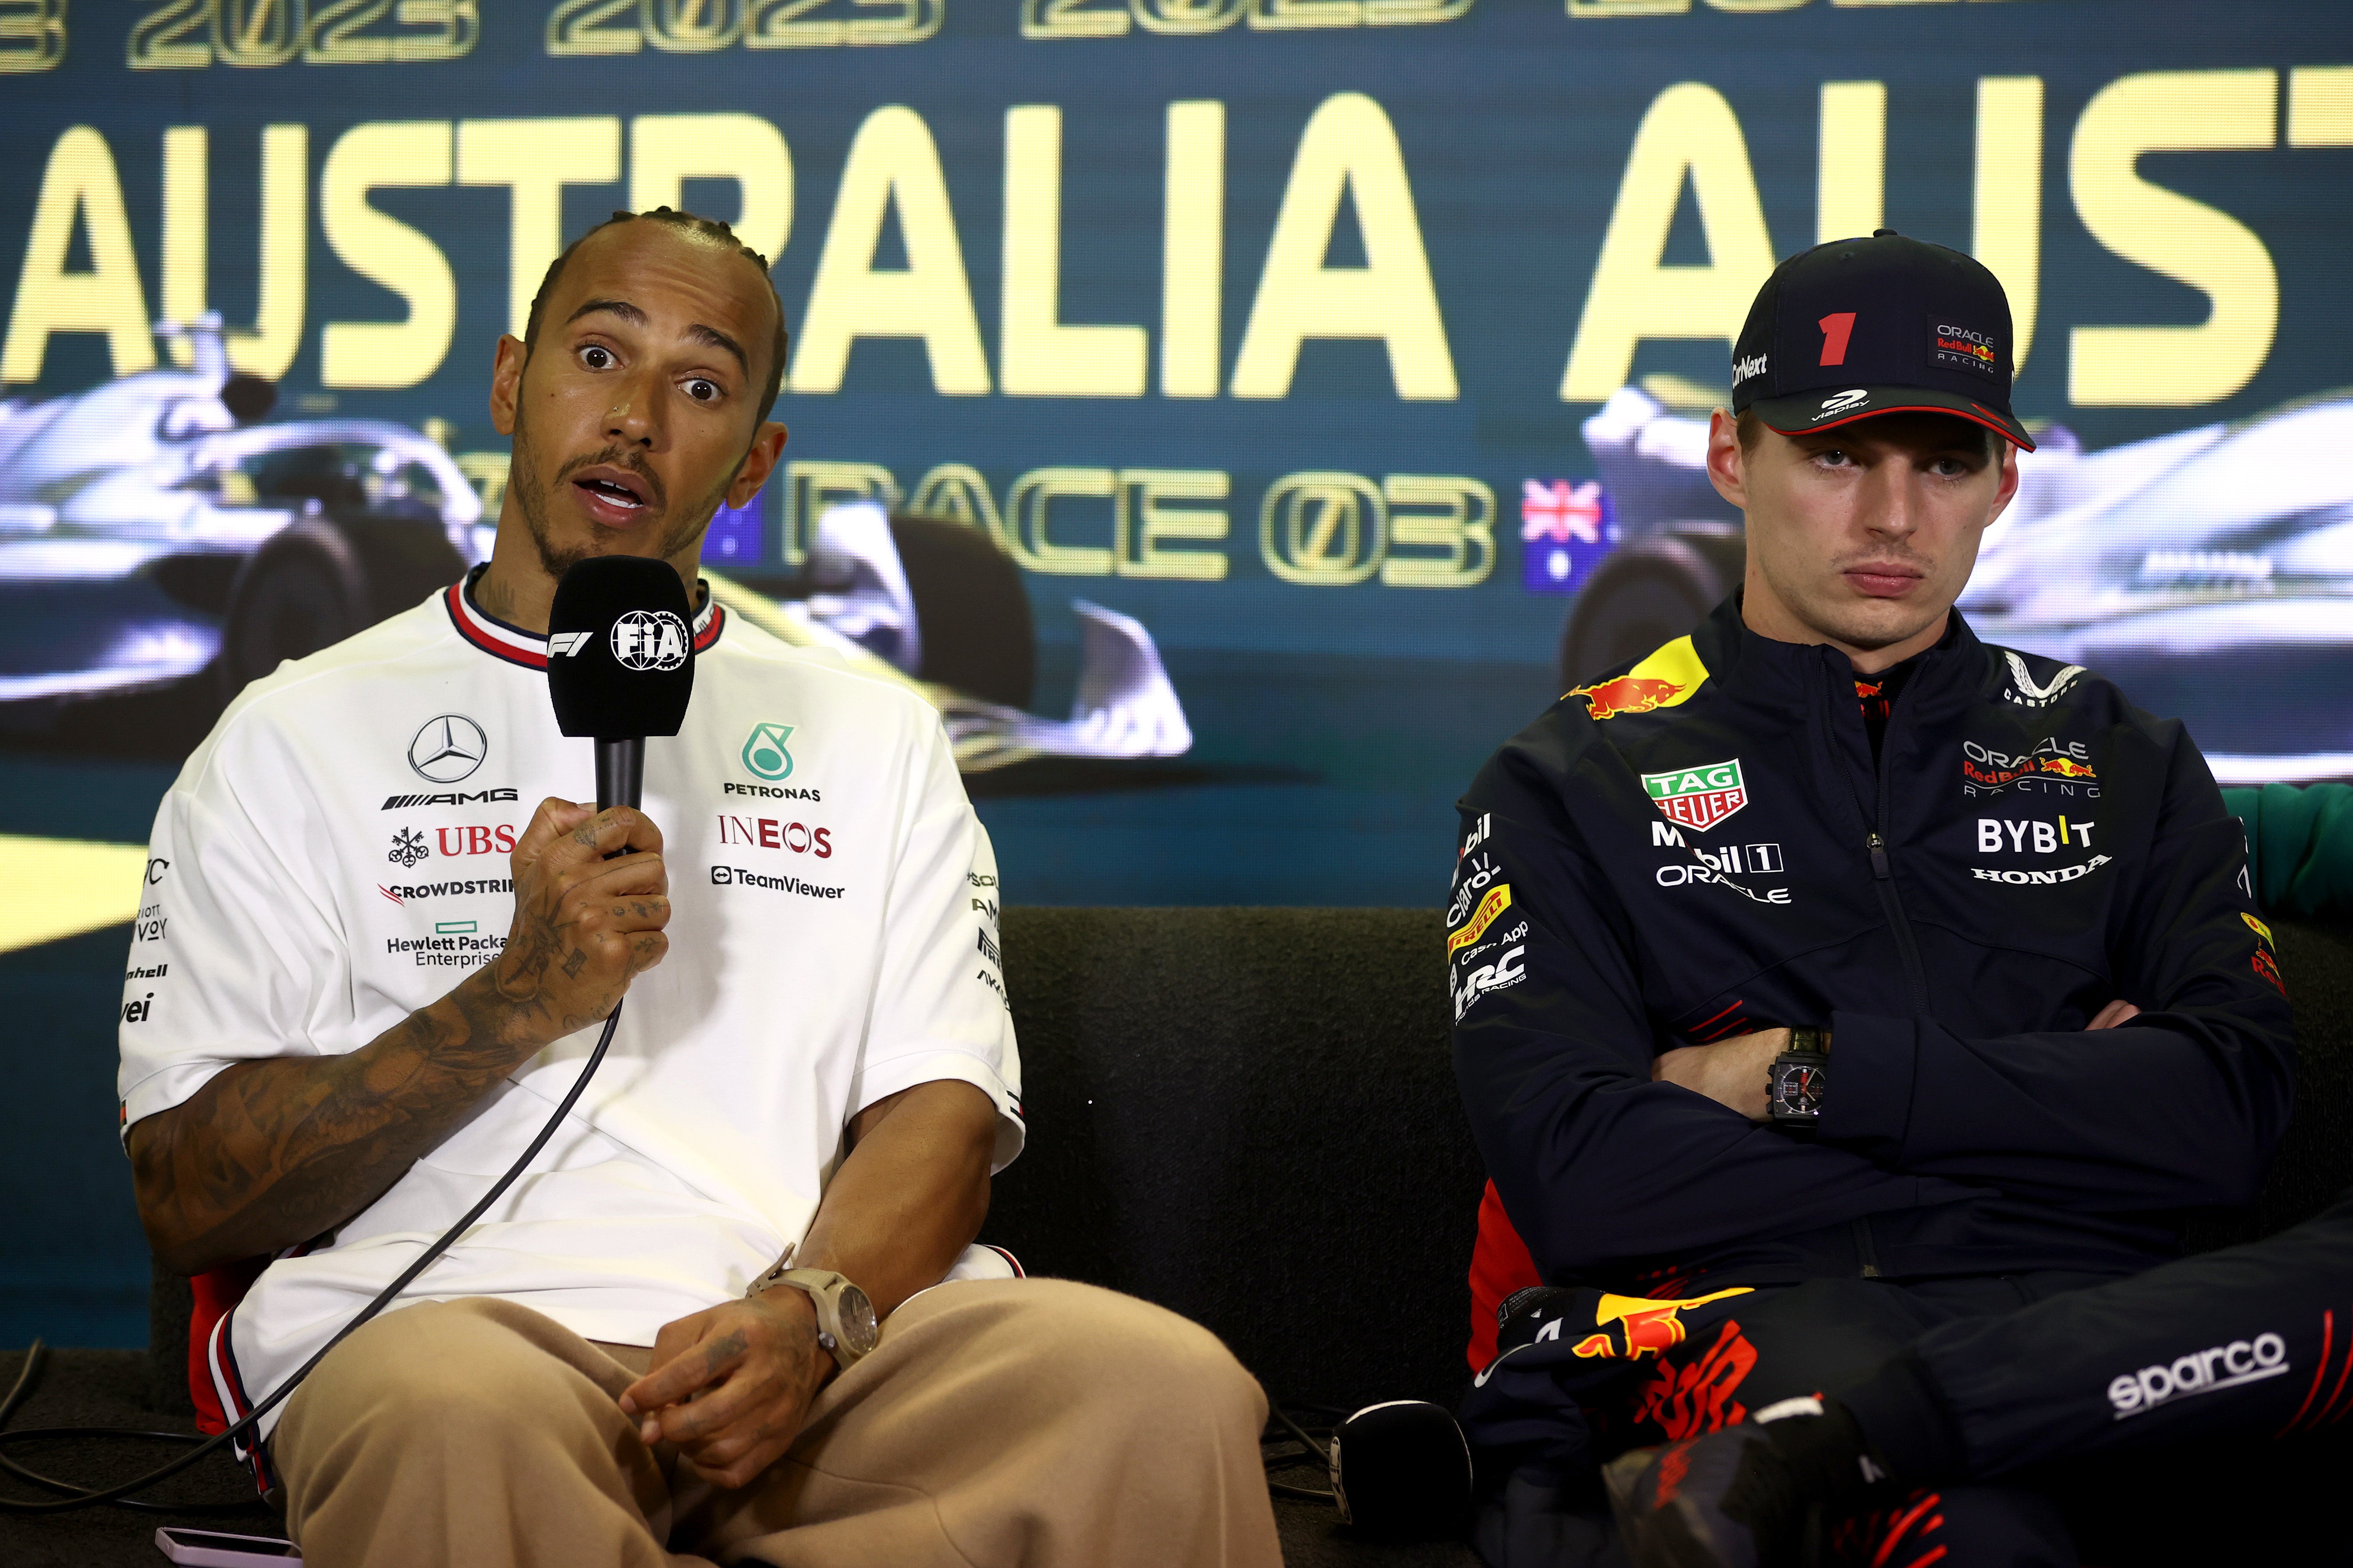 Max Verstappen believes Formula 1’s rules are not being enforced correctly after Lewis Hamilton’s overtake